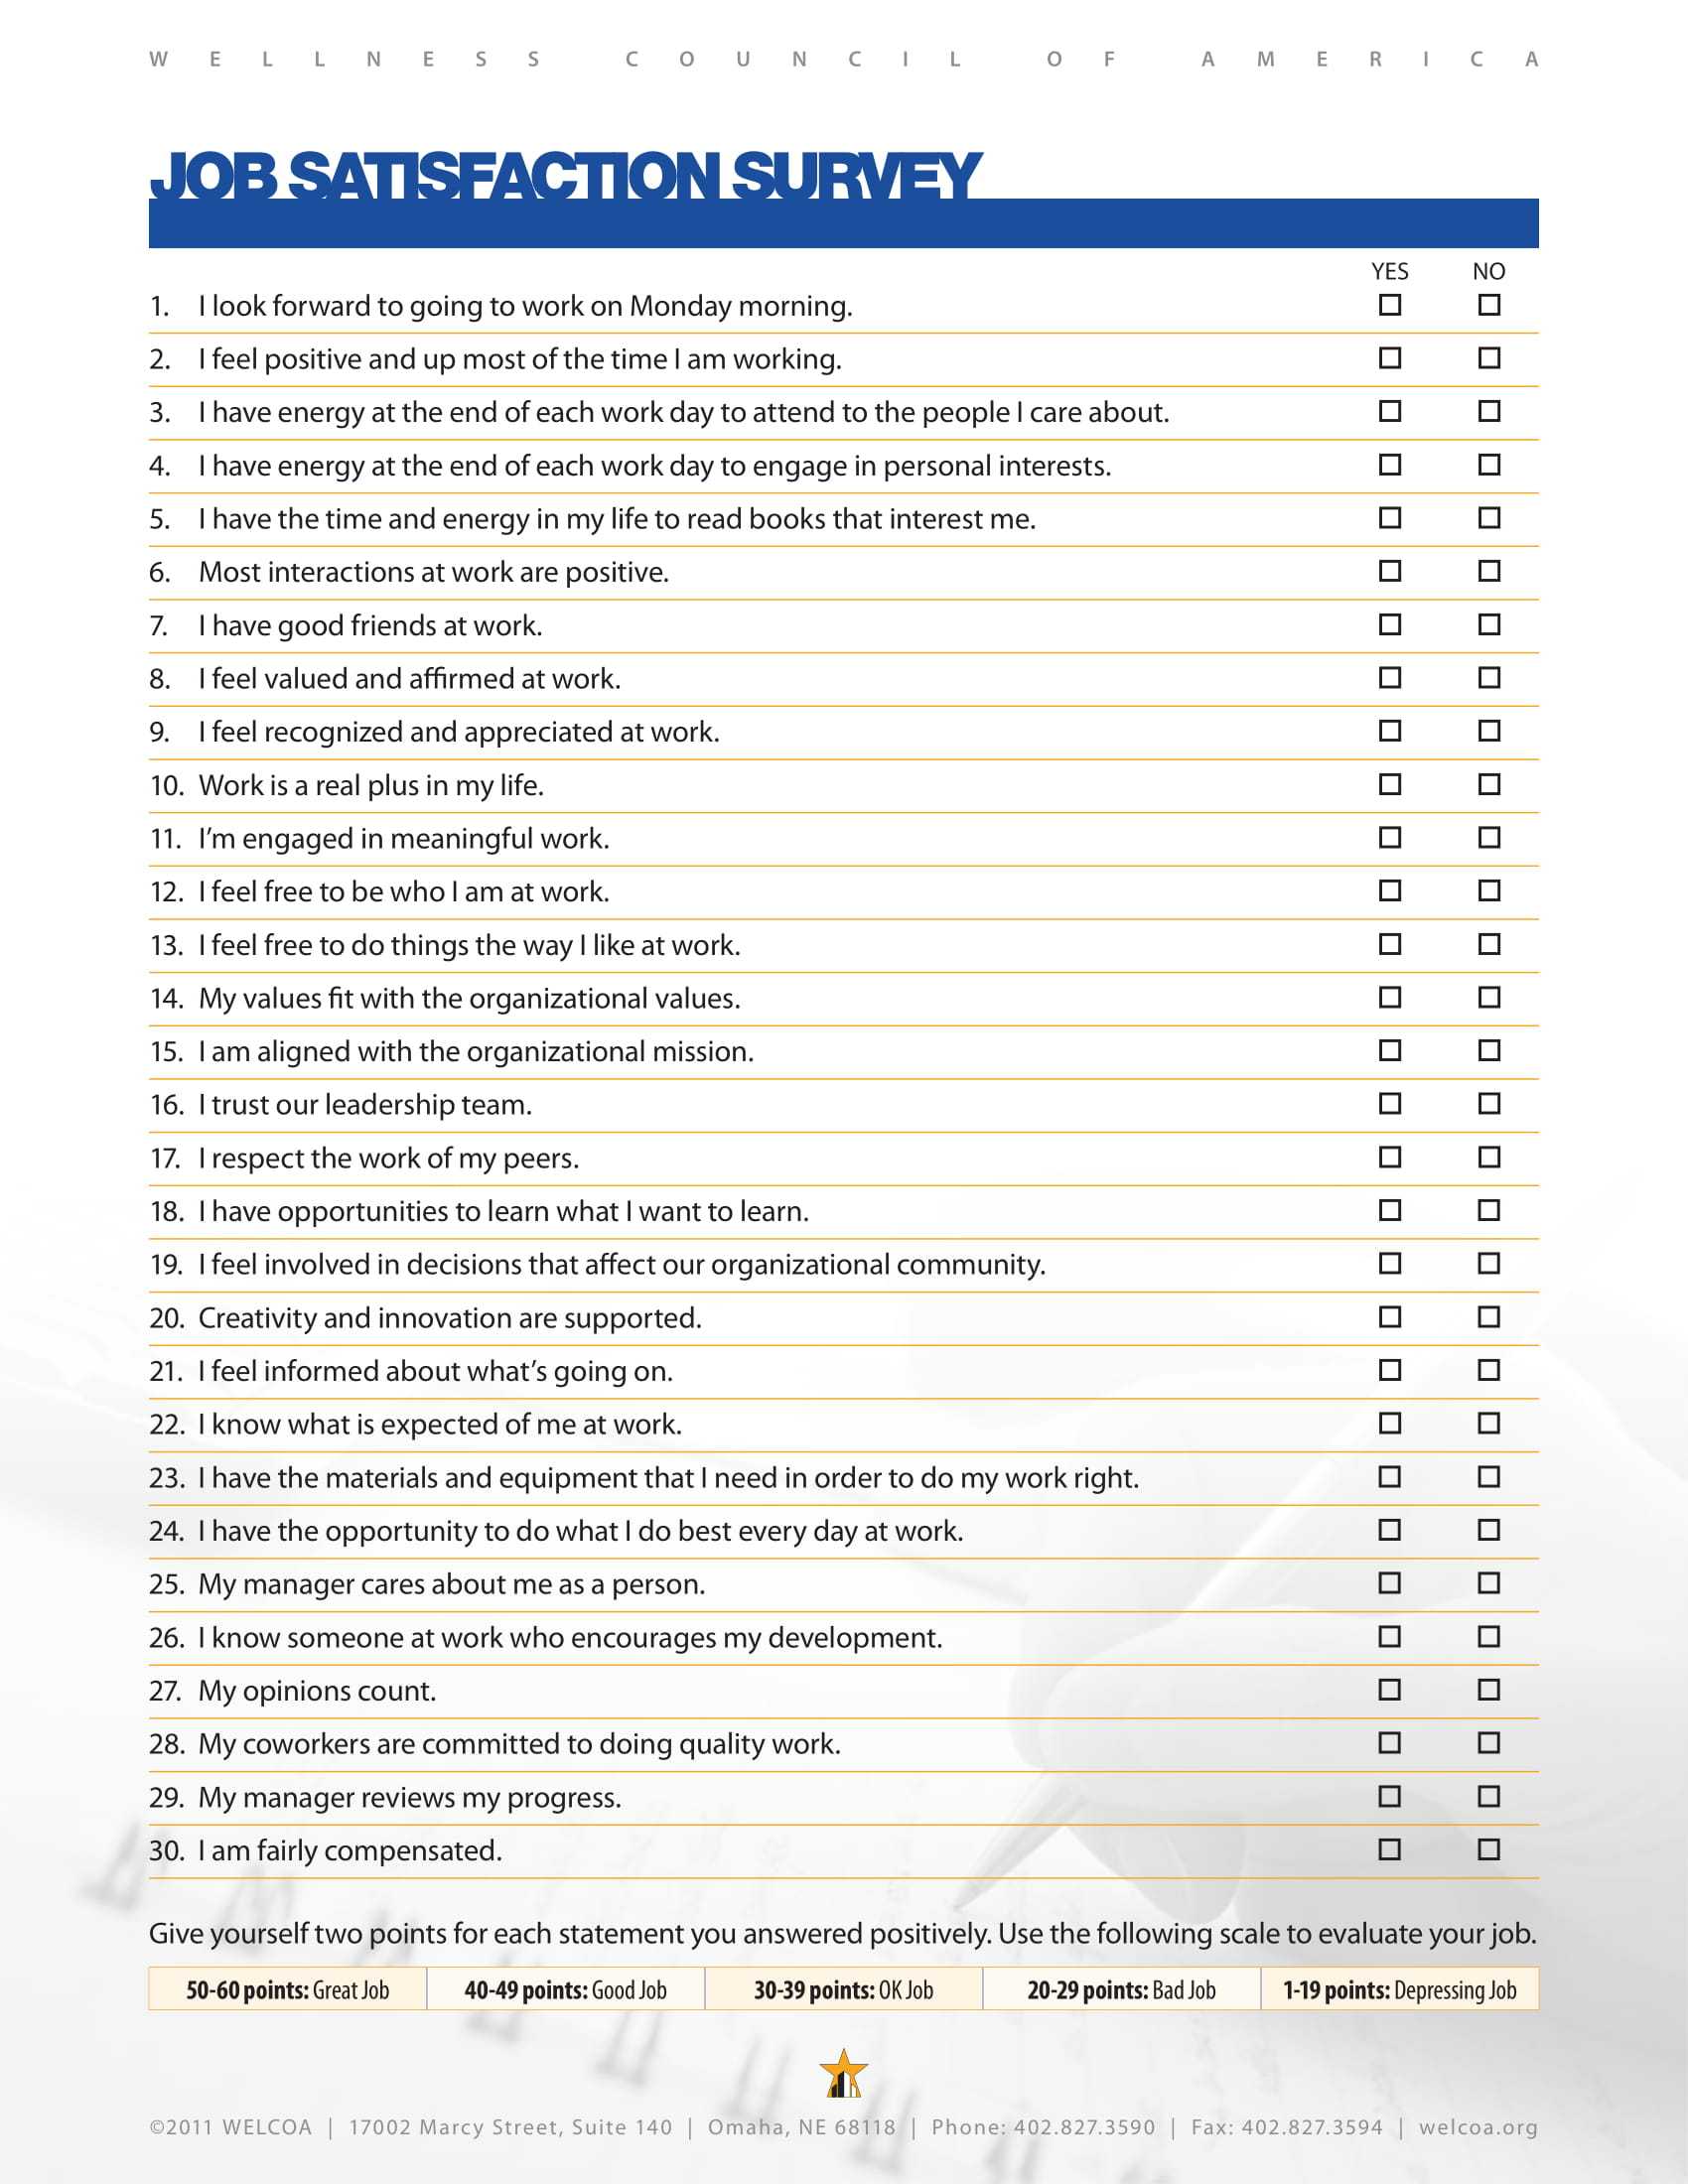 14+ Employee Satisfaction Survey Form Examples - Pdf, Doc Pertaining To Employee Satisfaction Survey Template Word